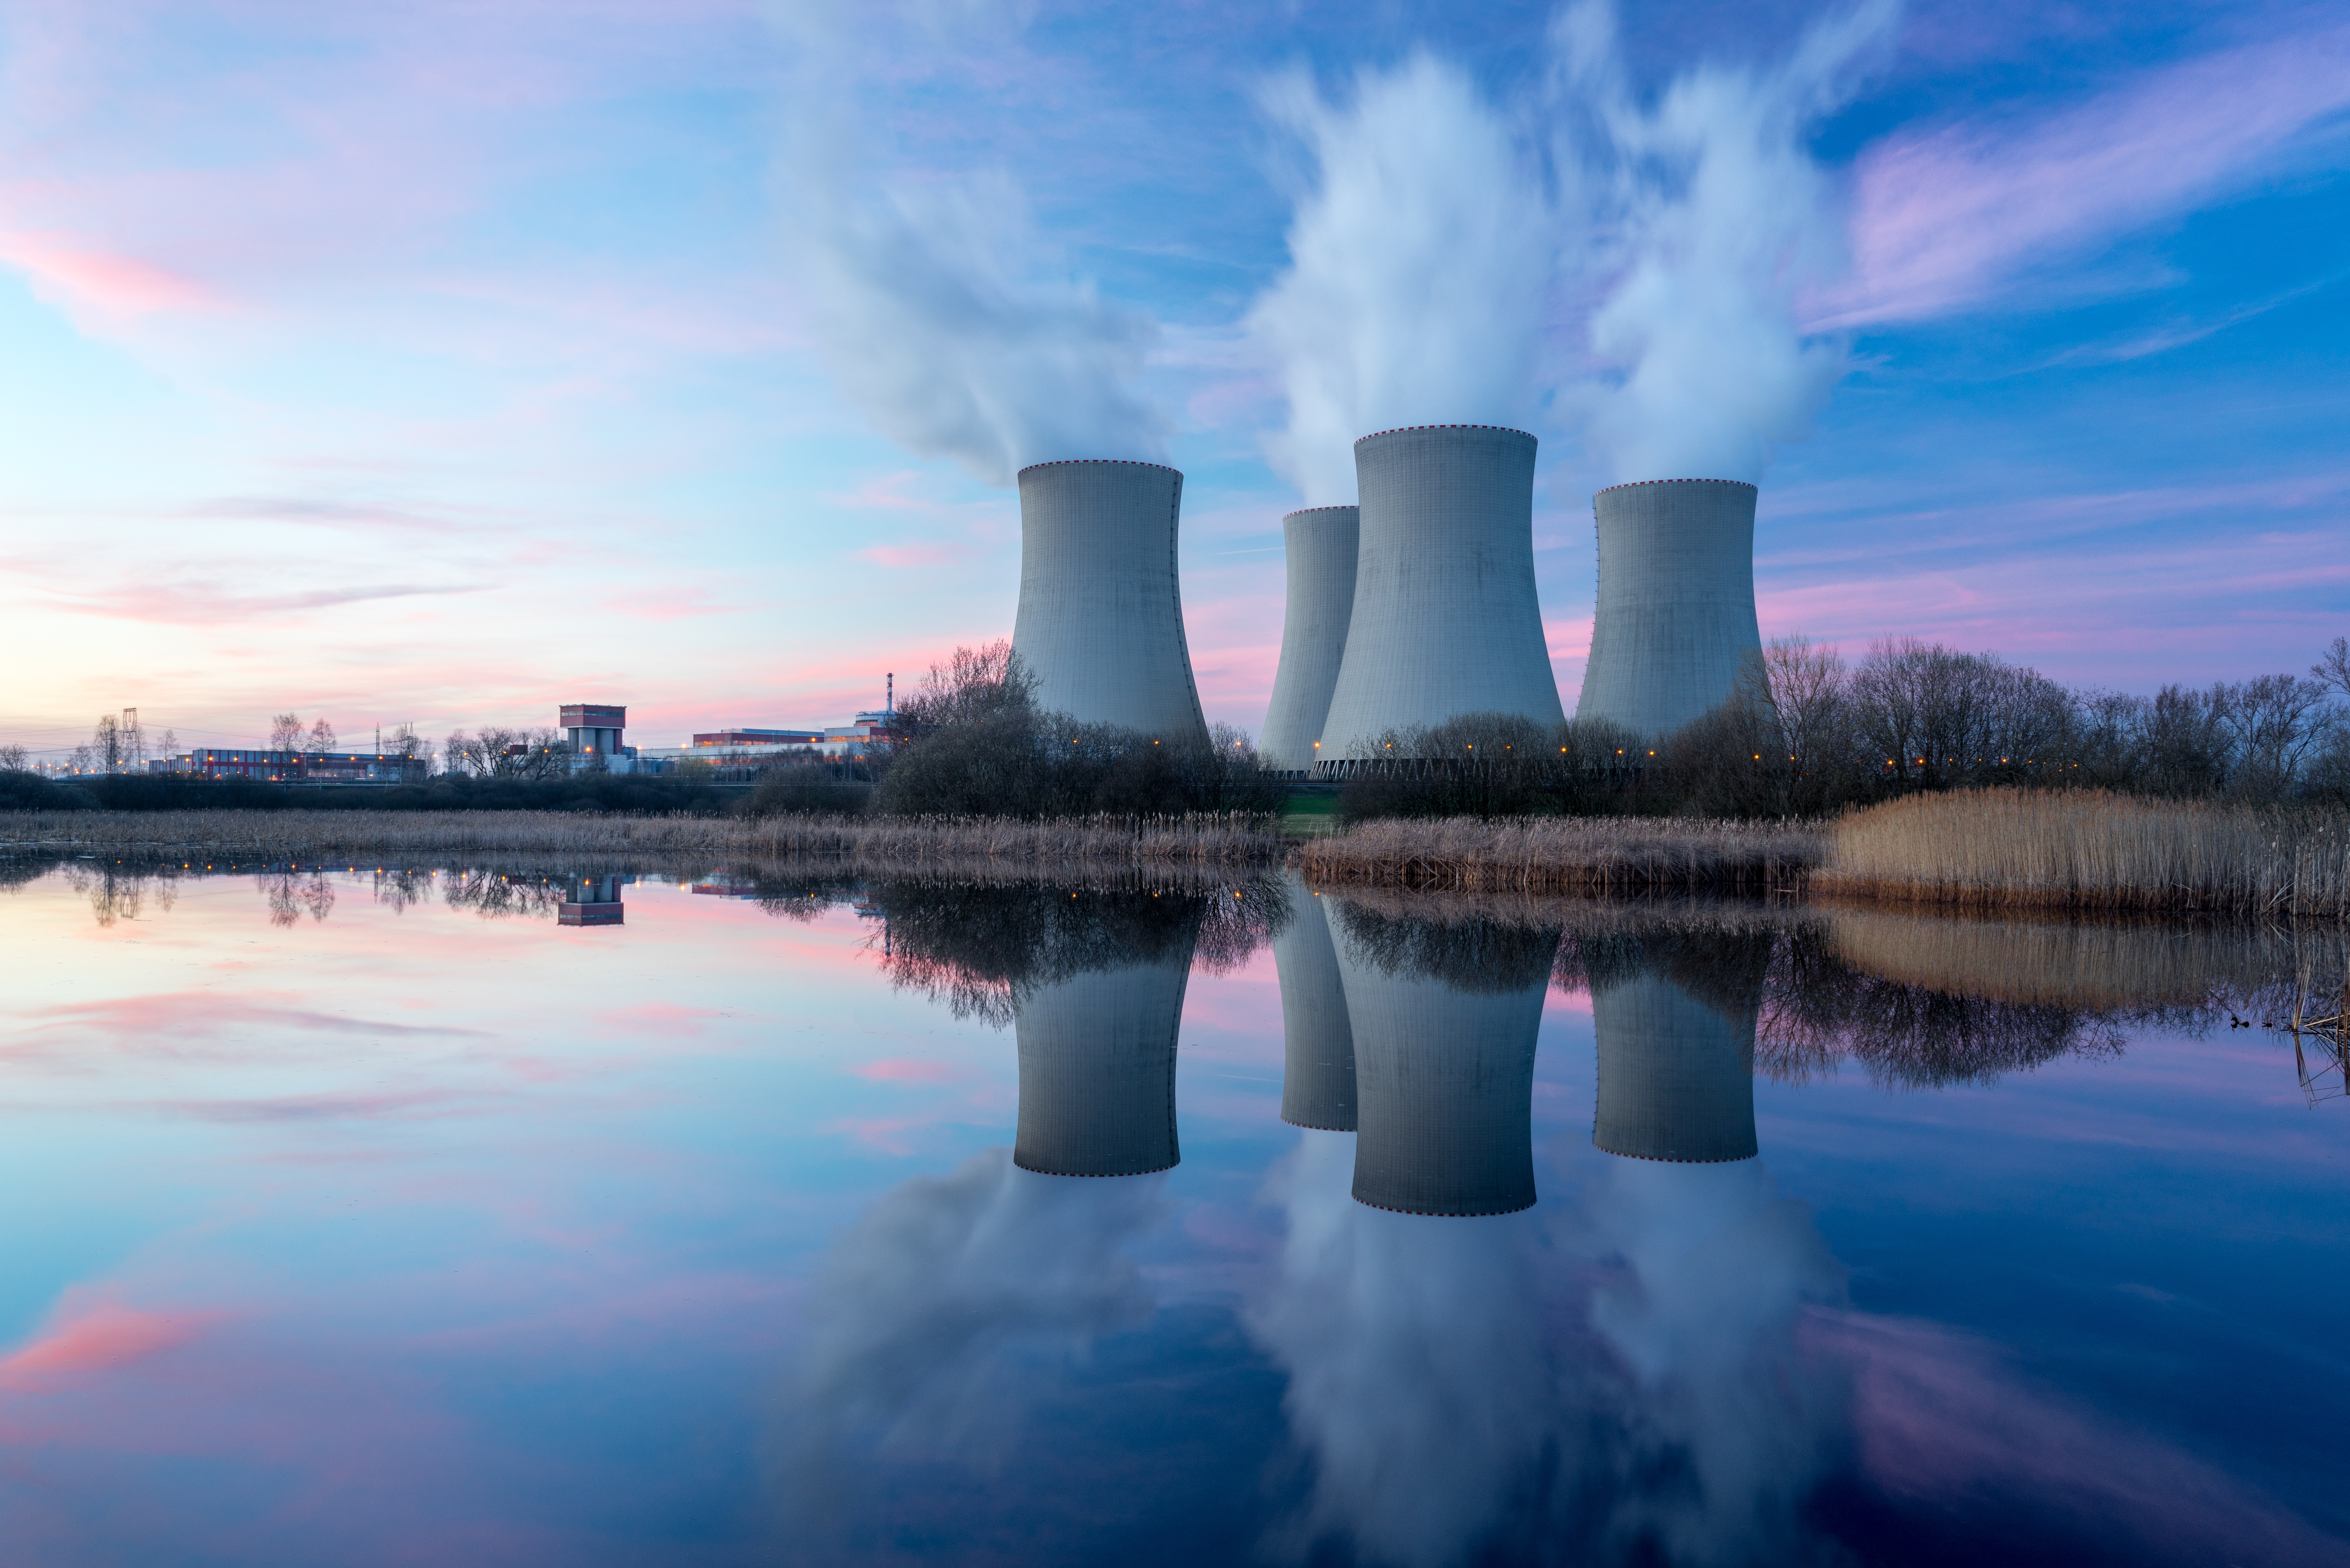 Photo of an active nuclear power plant taken during a sunset